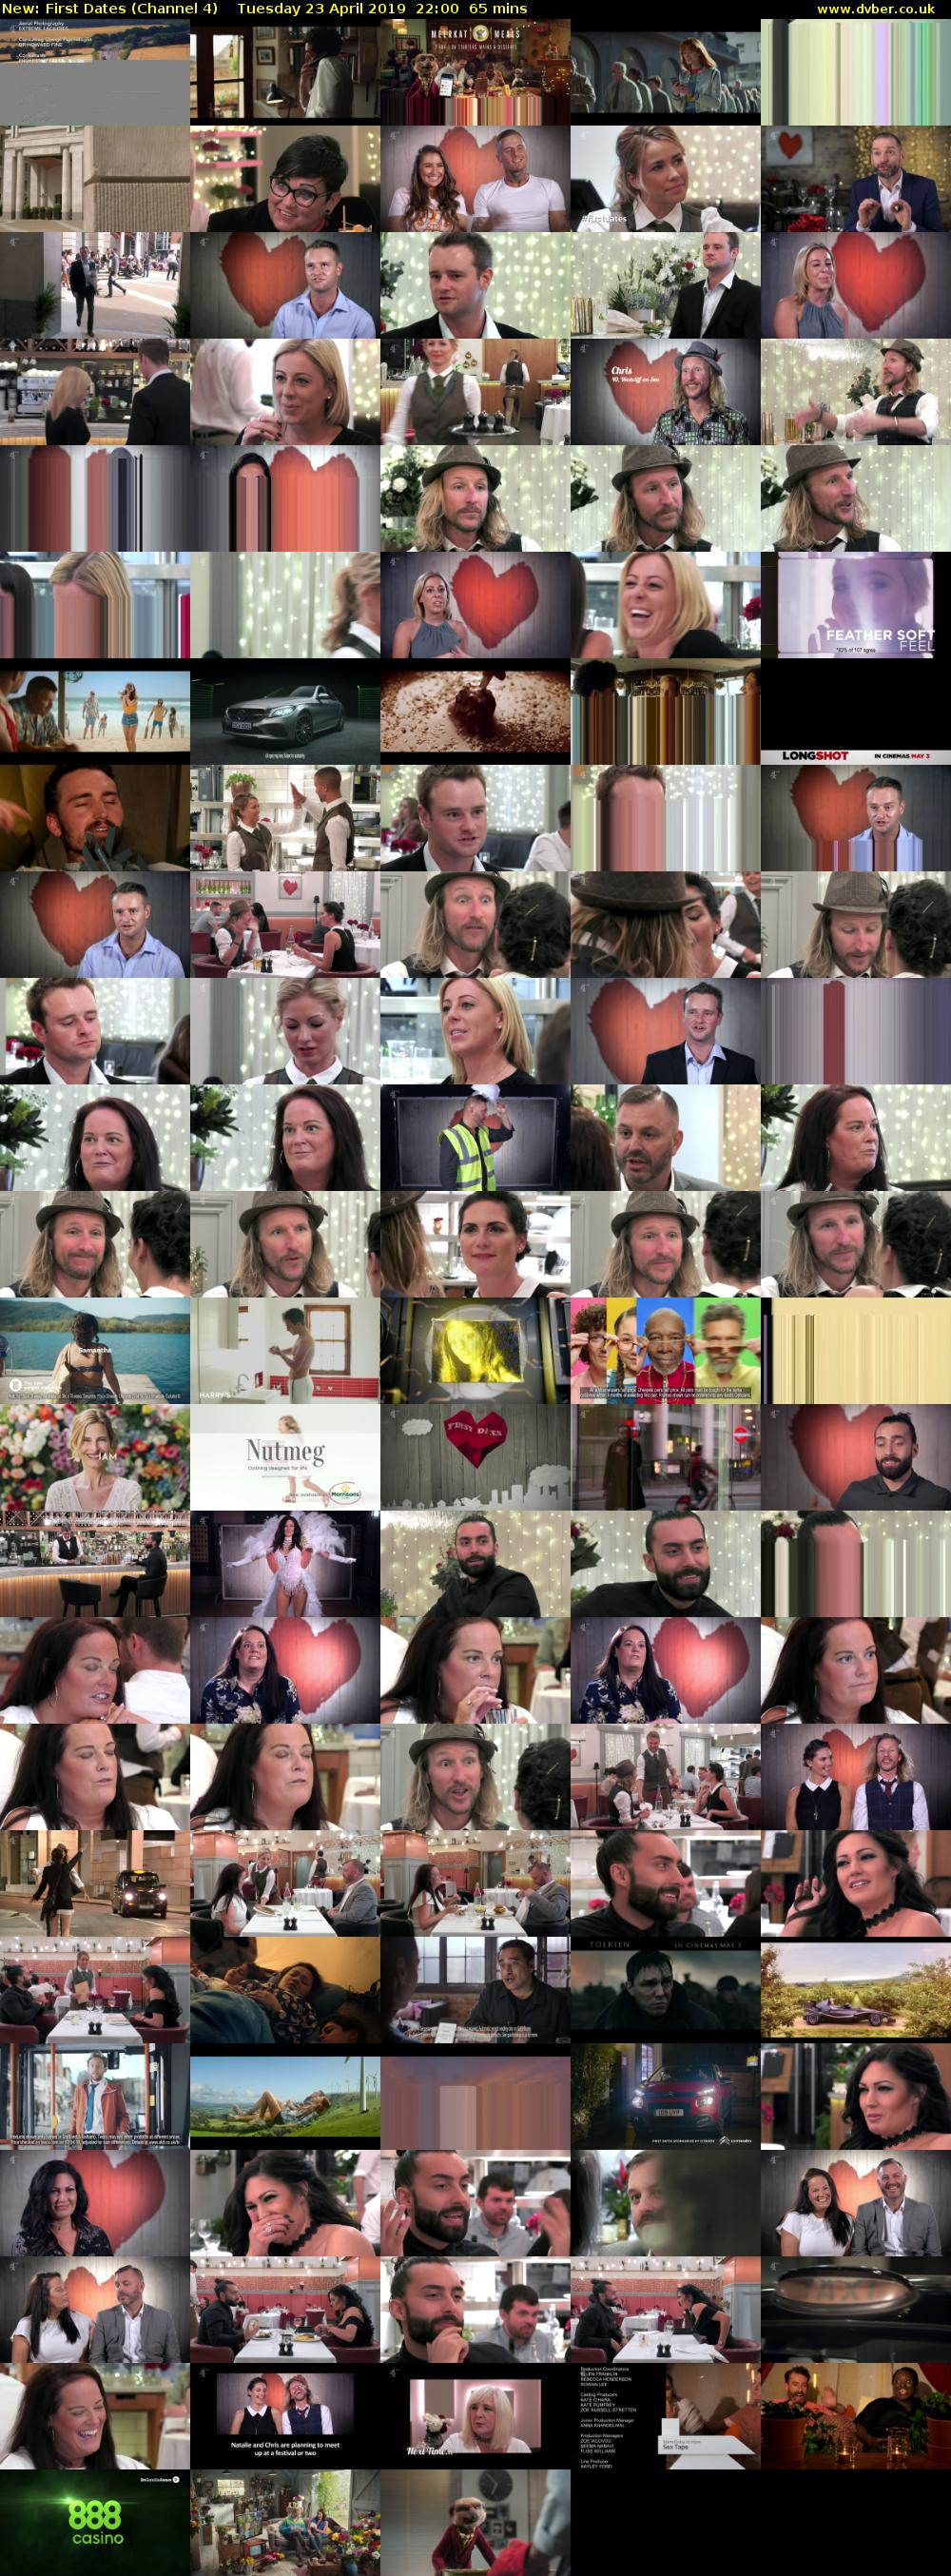 First Dates (Channel 4) Tuesday 23 April 2019 22:00 - 23:05